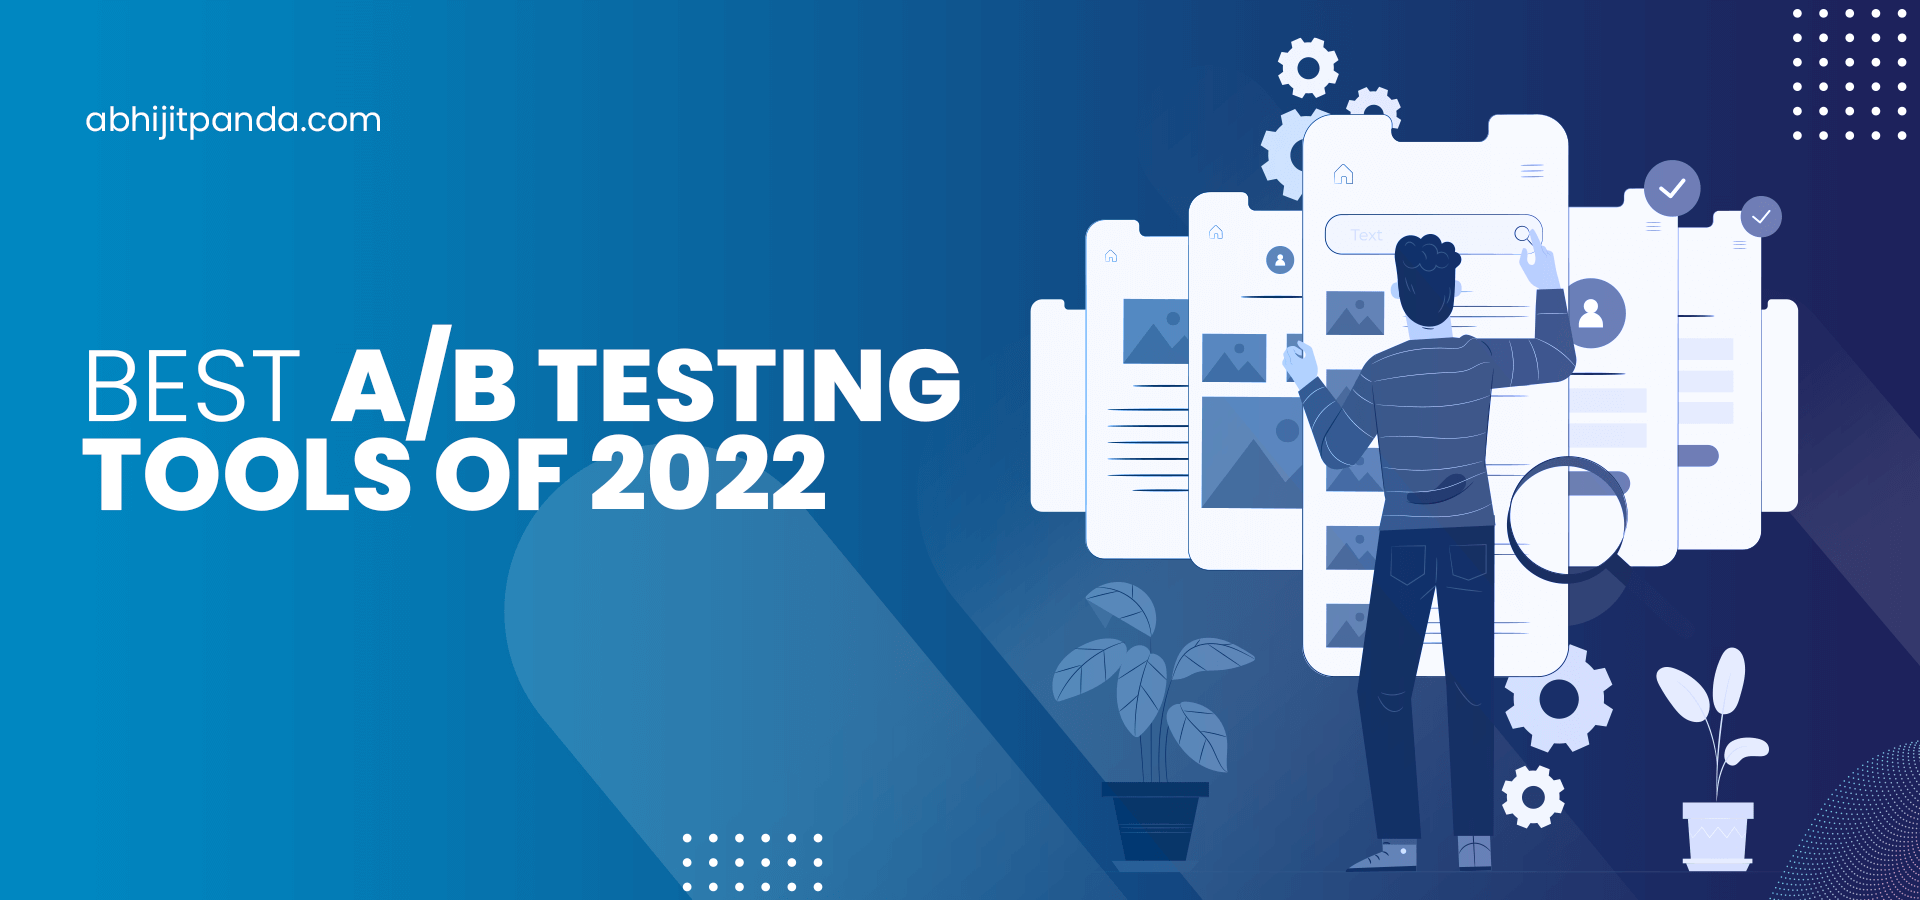 Best A/B Testing Tools of 2022